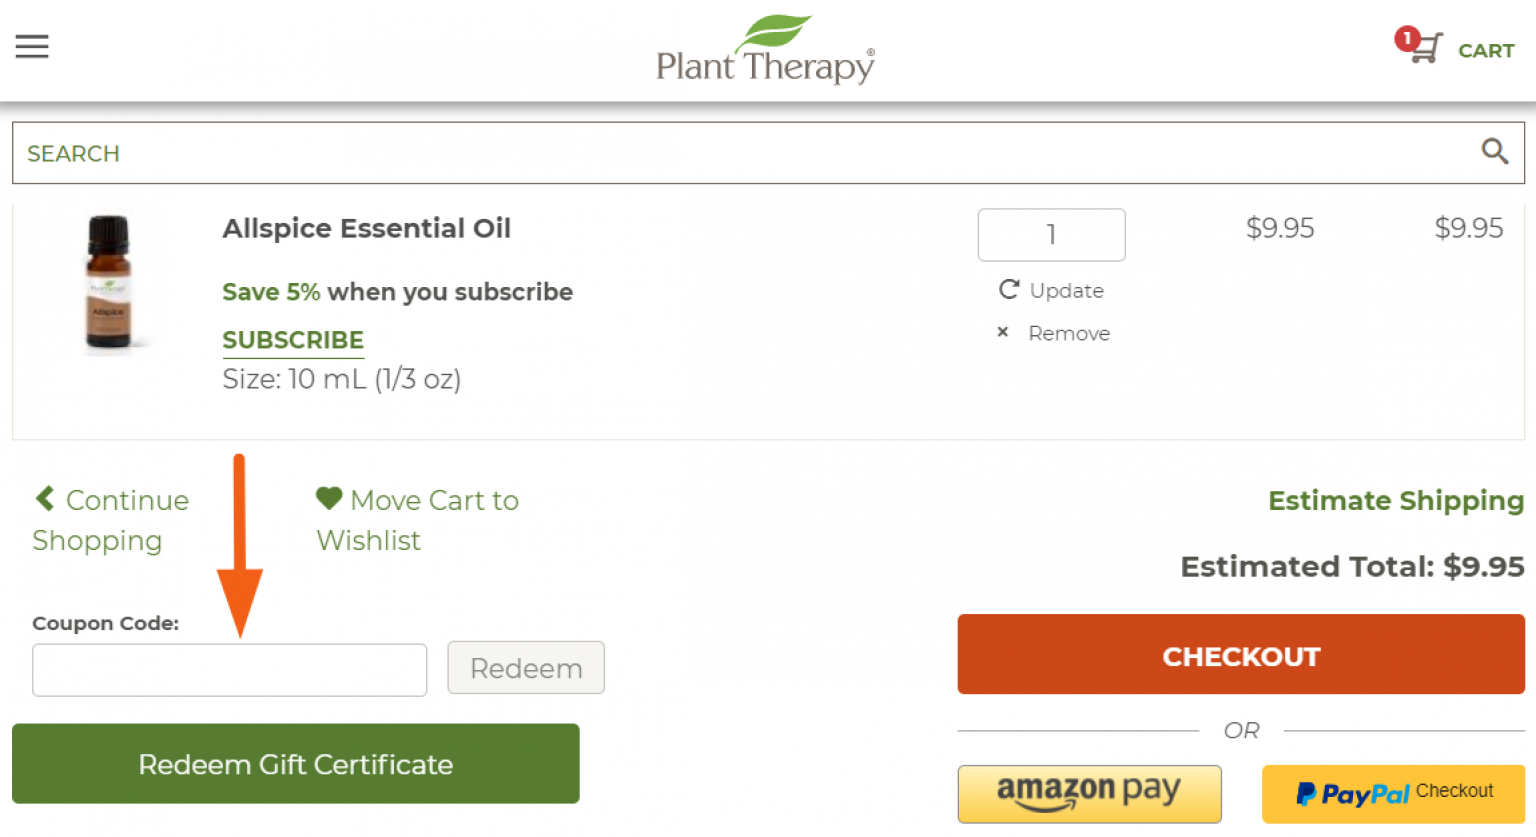 Plant Therapy Coupons, Deals & Discount Codes 2022